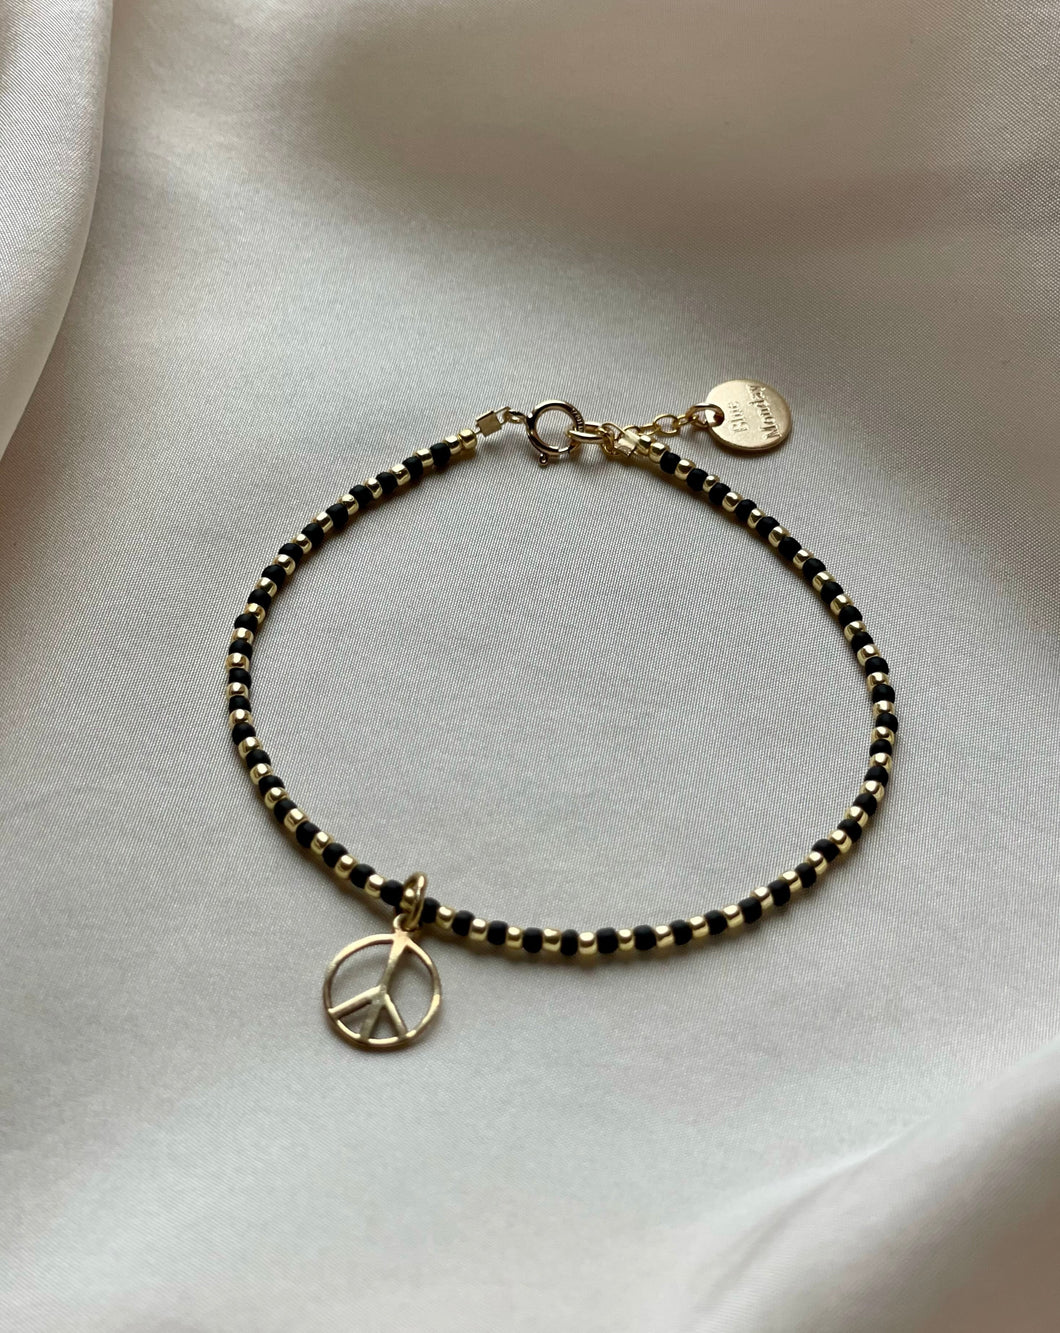 Peace out - Black and Gold bracelet